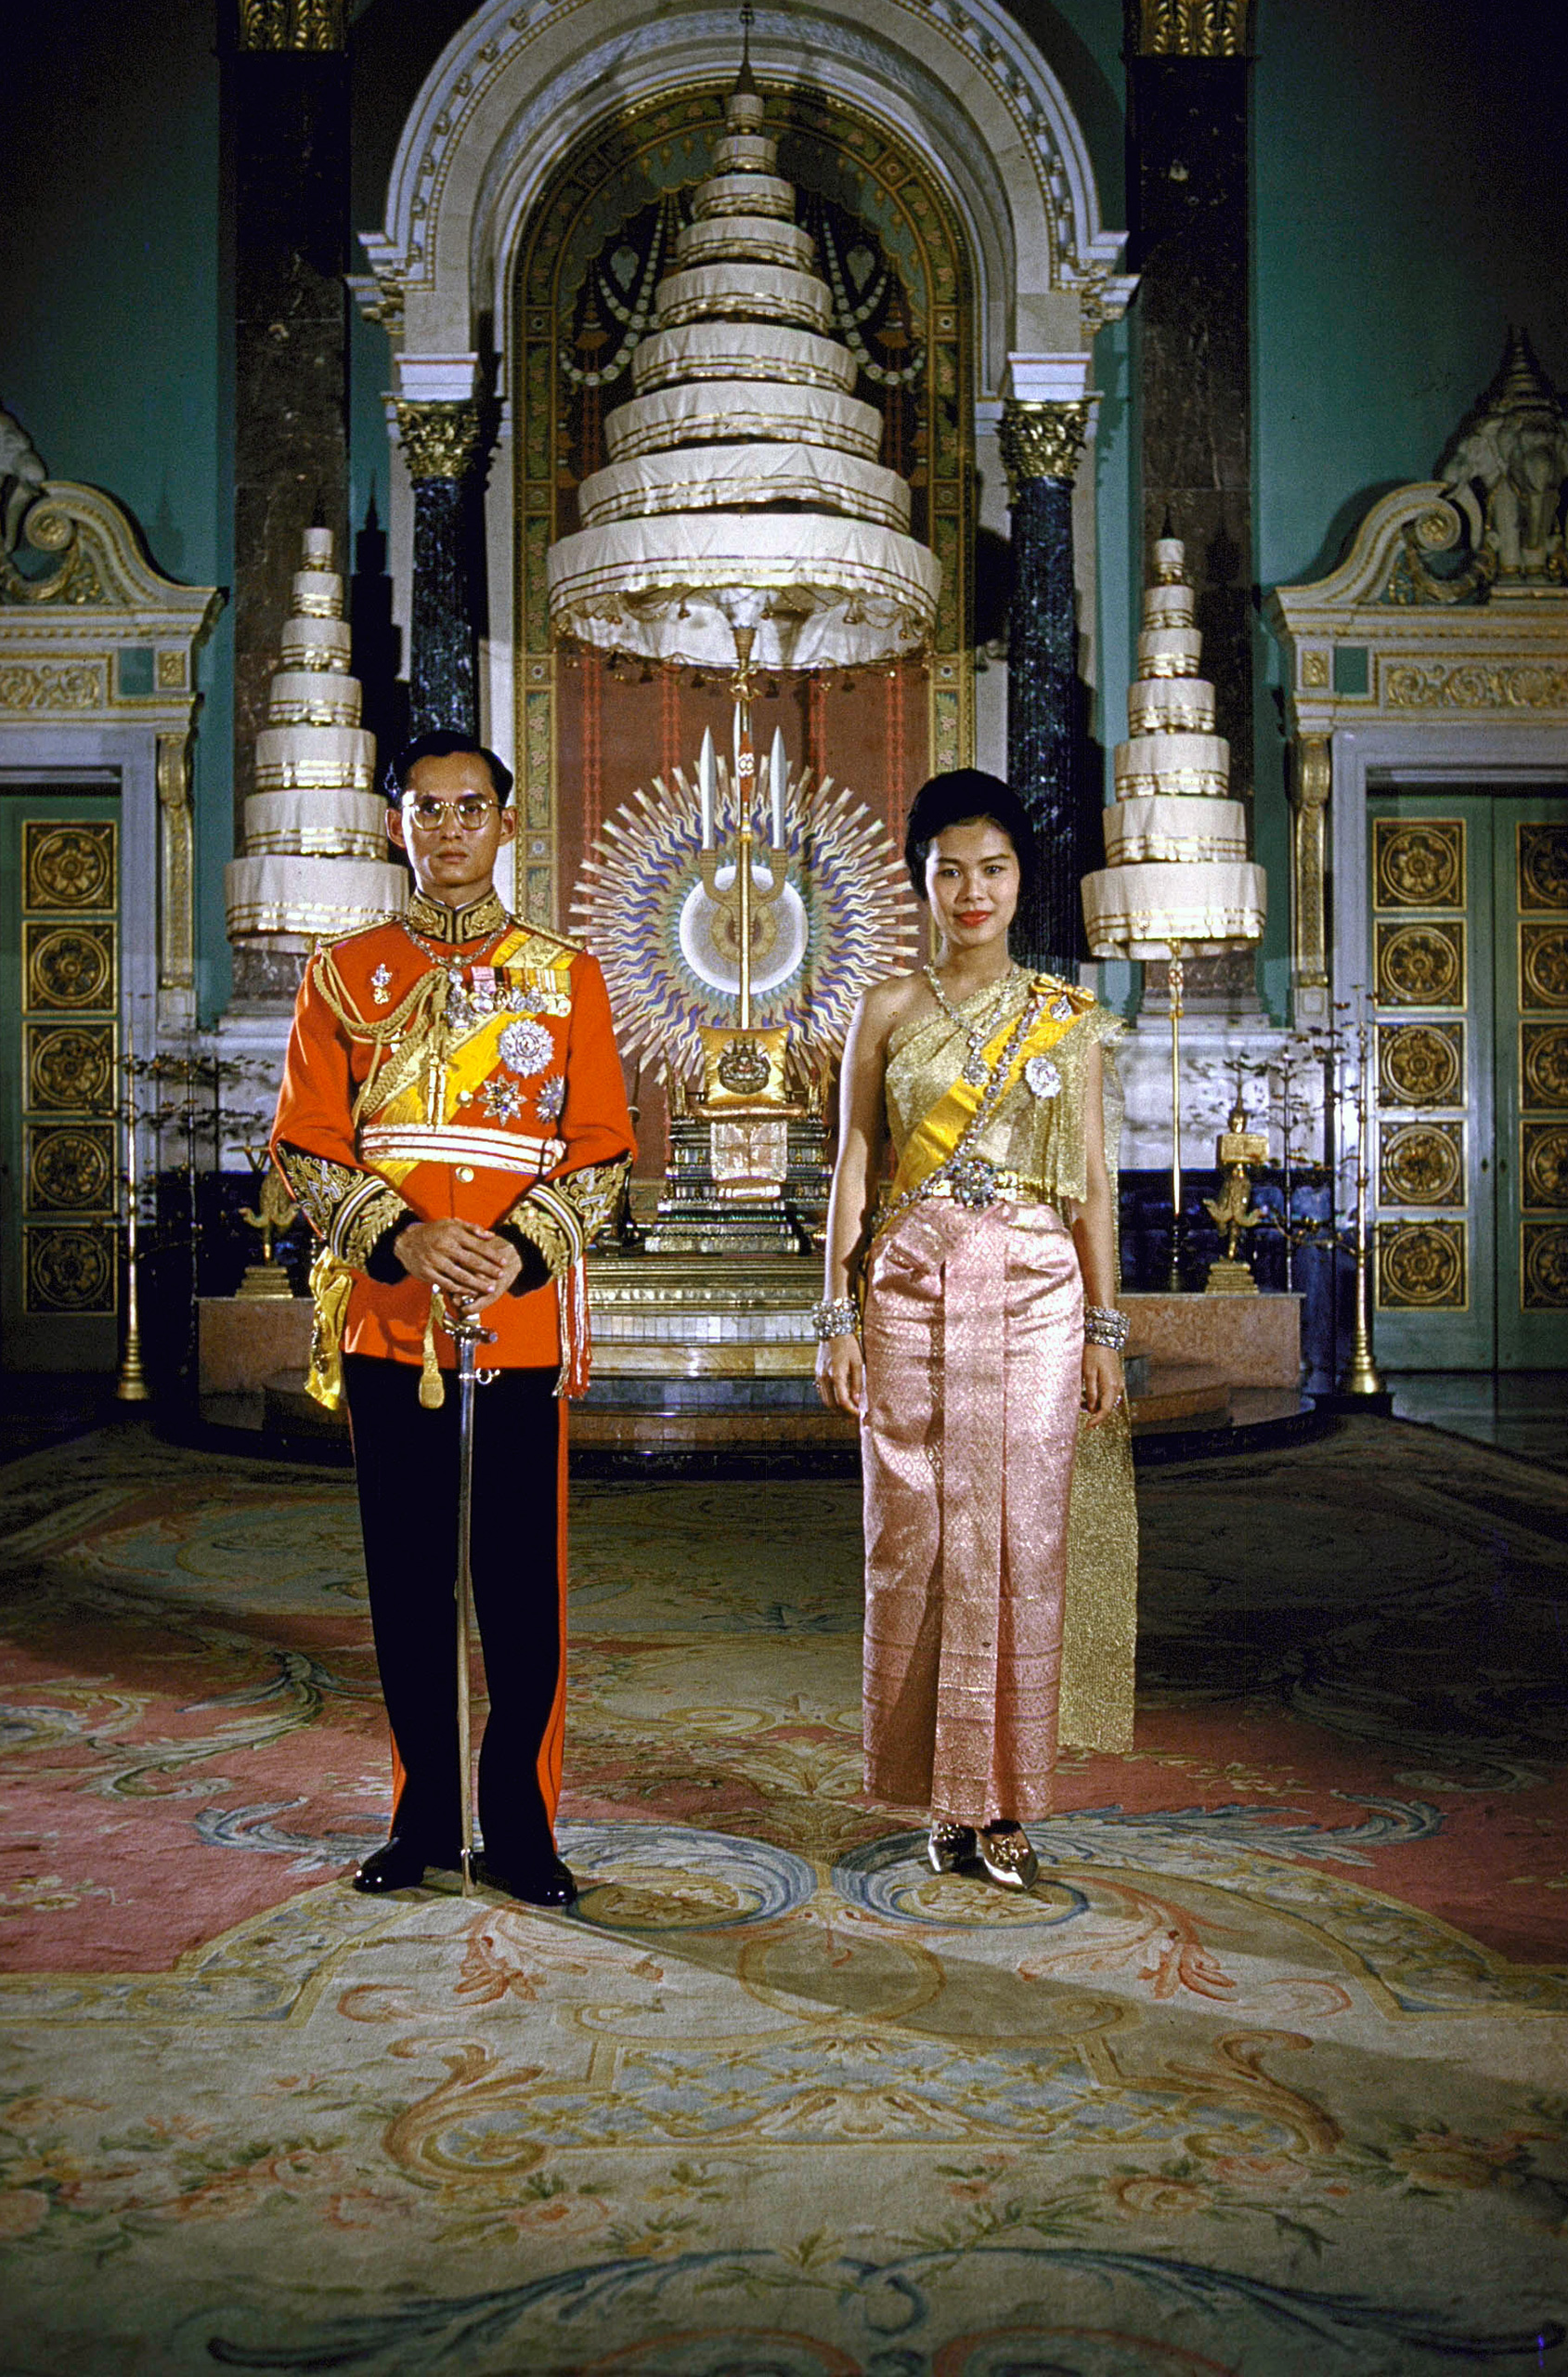 Formal portrait of Thailand's King Bhumibol Adulyadej (aka Phumiphon Aduldet) and Queen Sirikit at the Palace in 1960. The nine-tiered parasol in background is a symbol of the Chakri Dynasty.